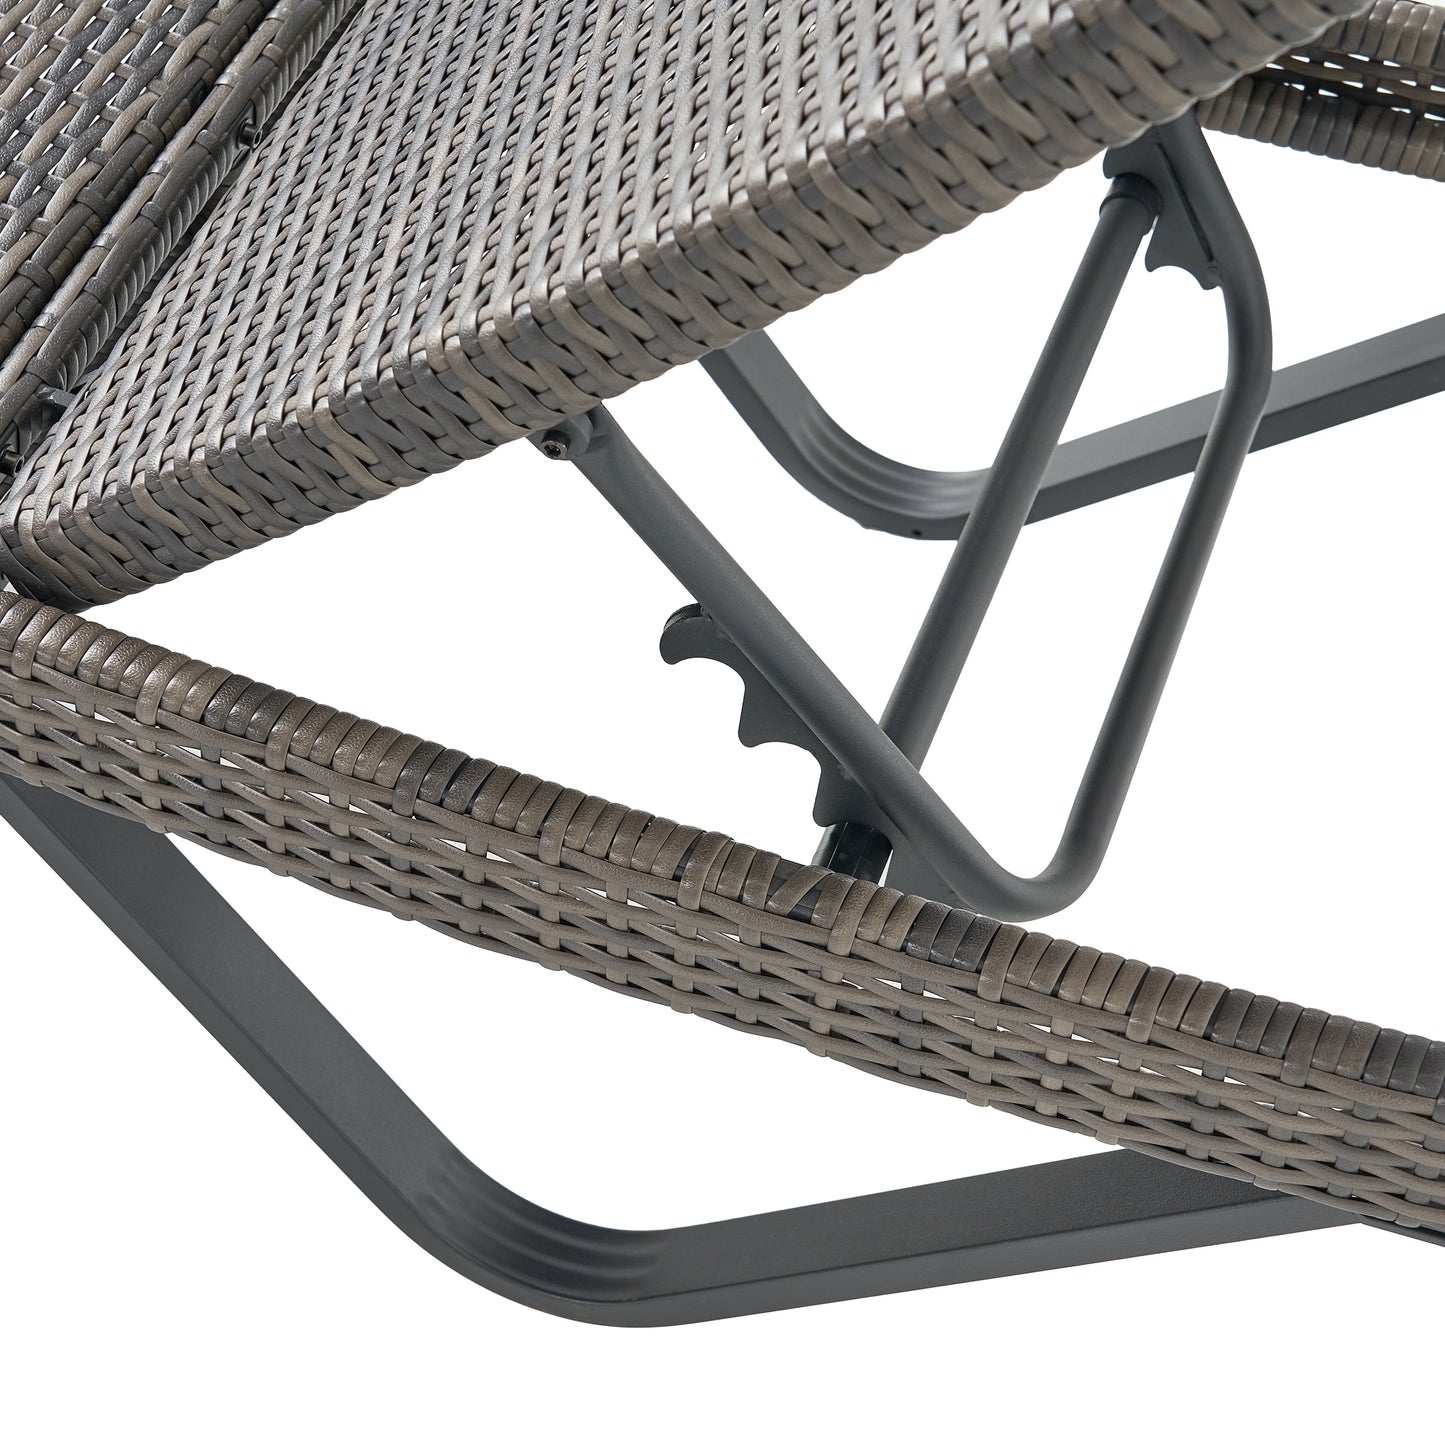 Zanna Outdoor Gray Wicker Adjustable Chaise Lounge